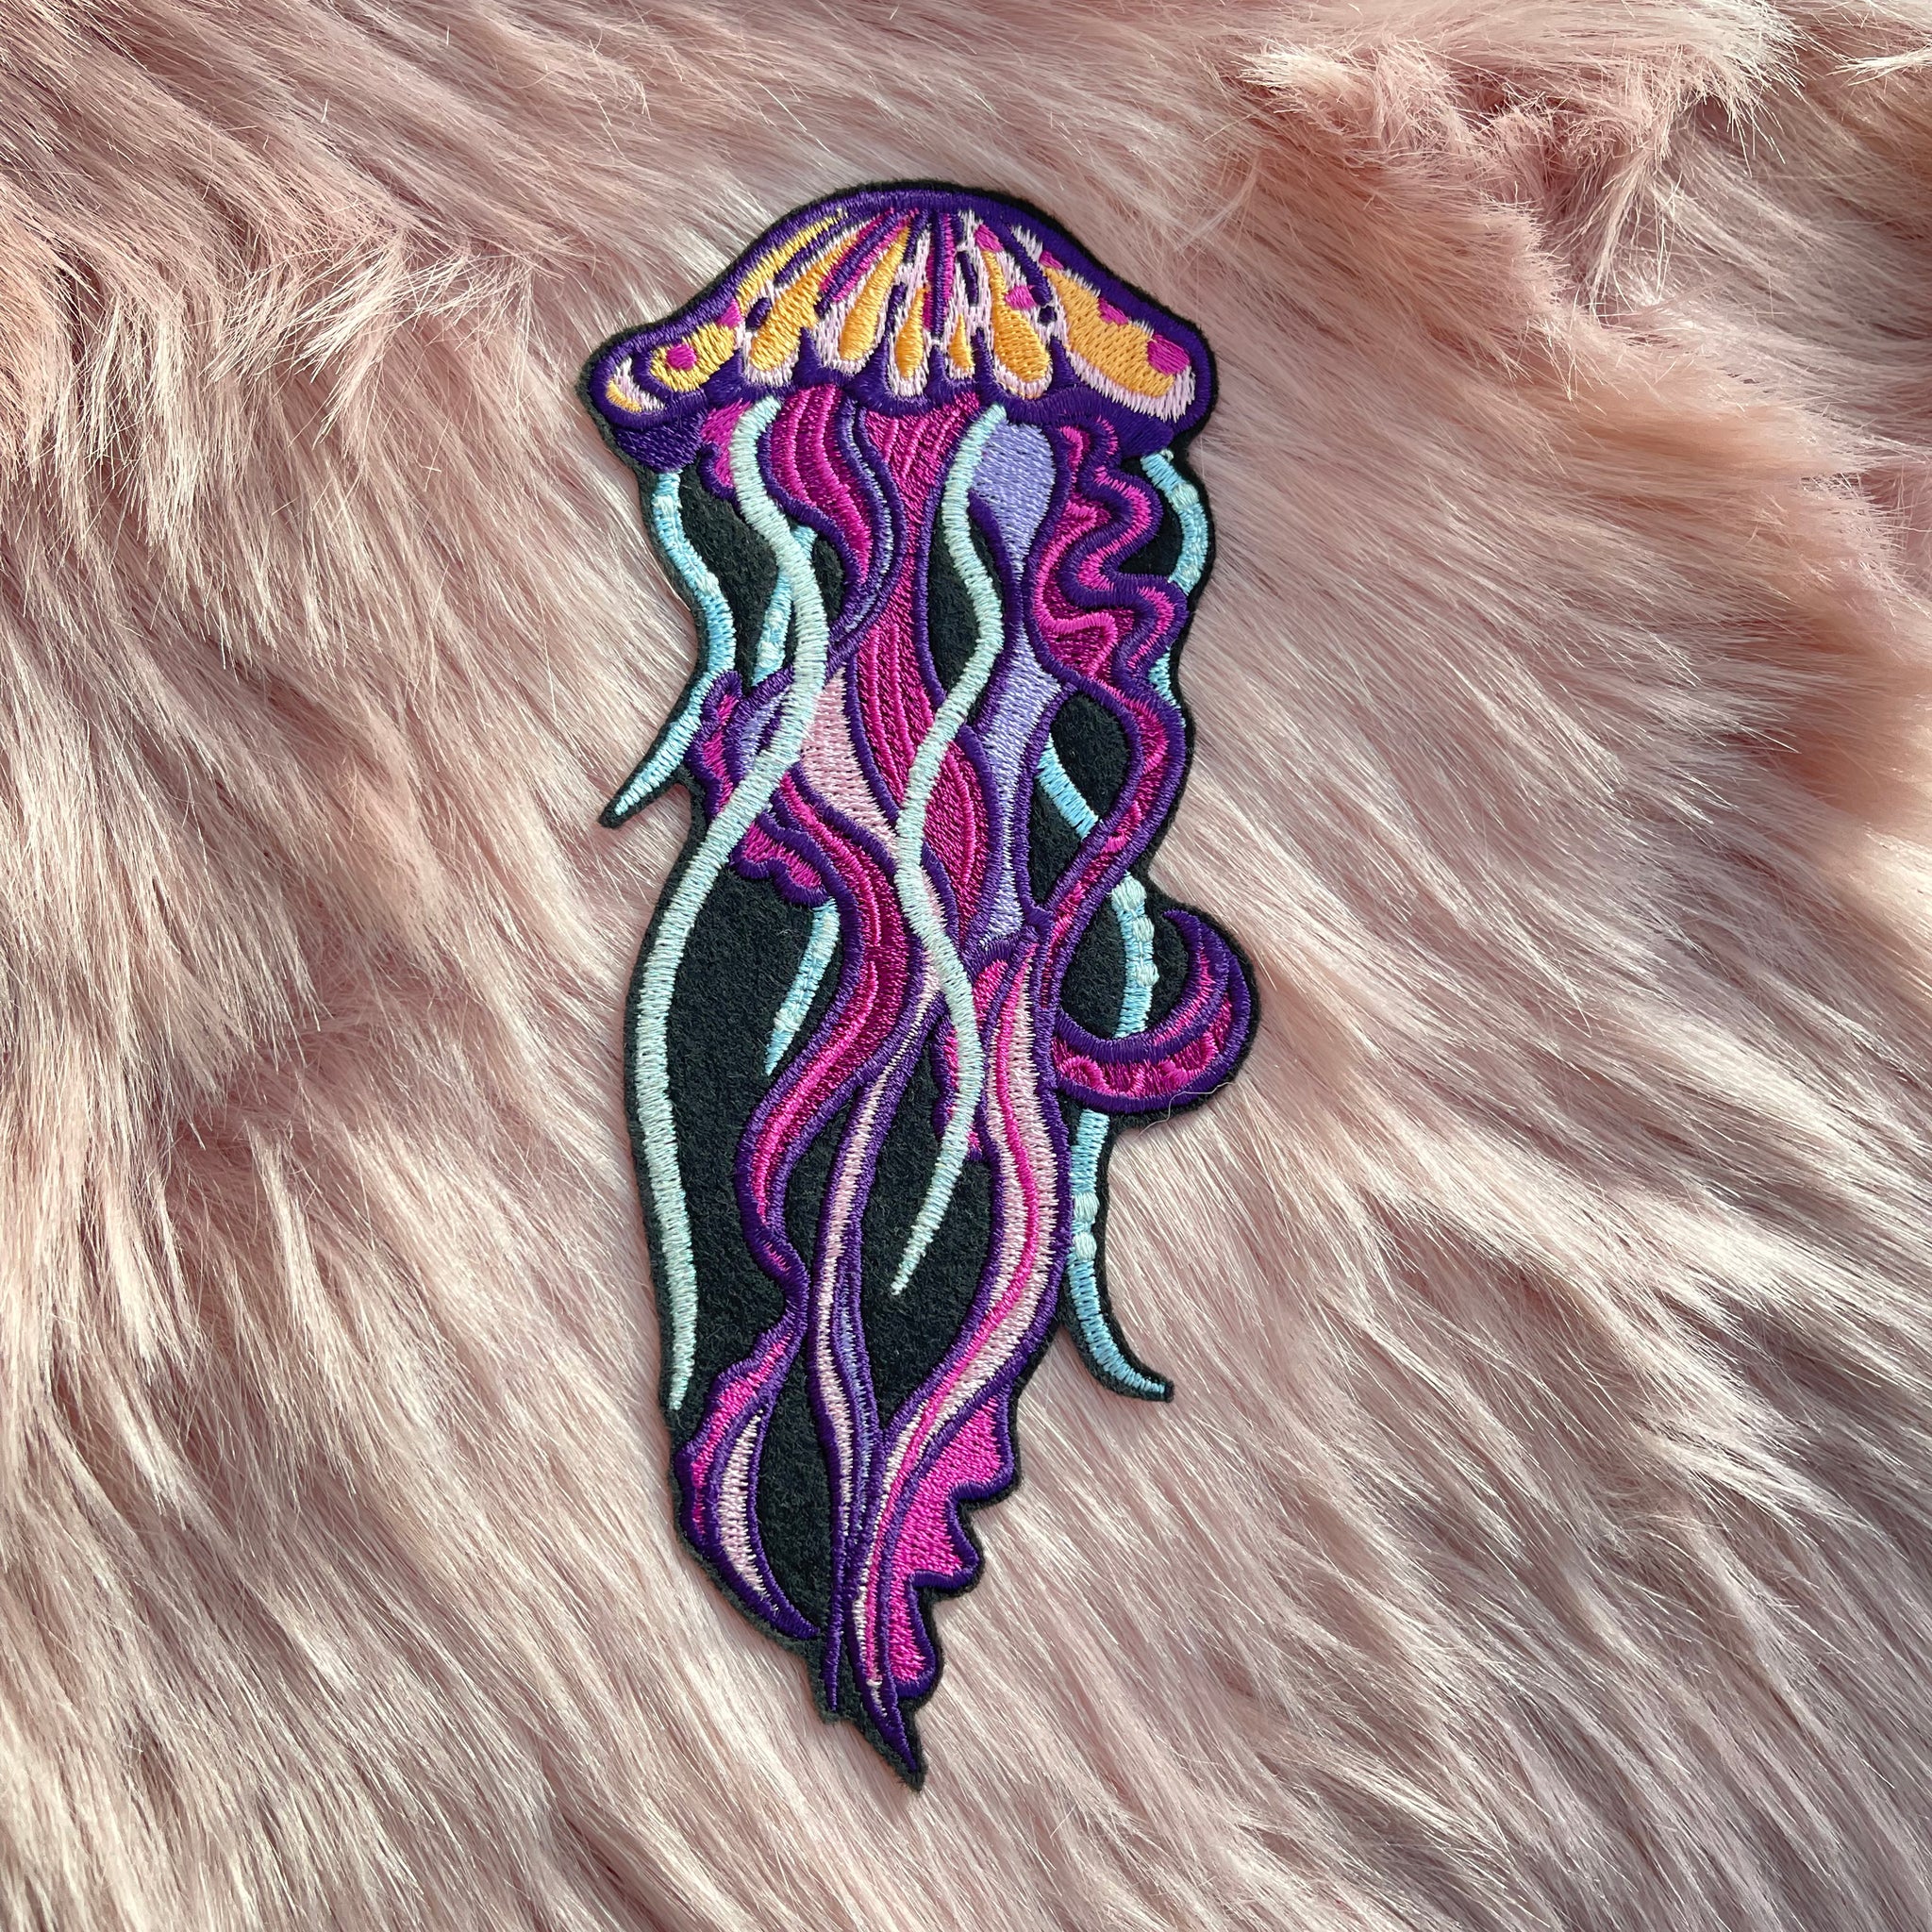 Jellyfish Embroidery Patch